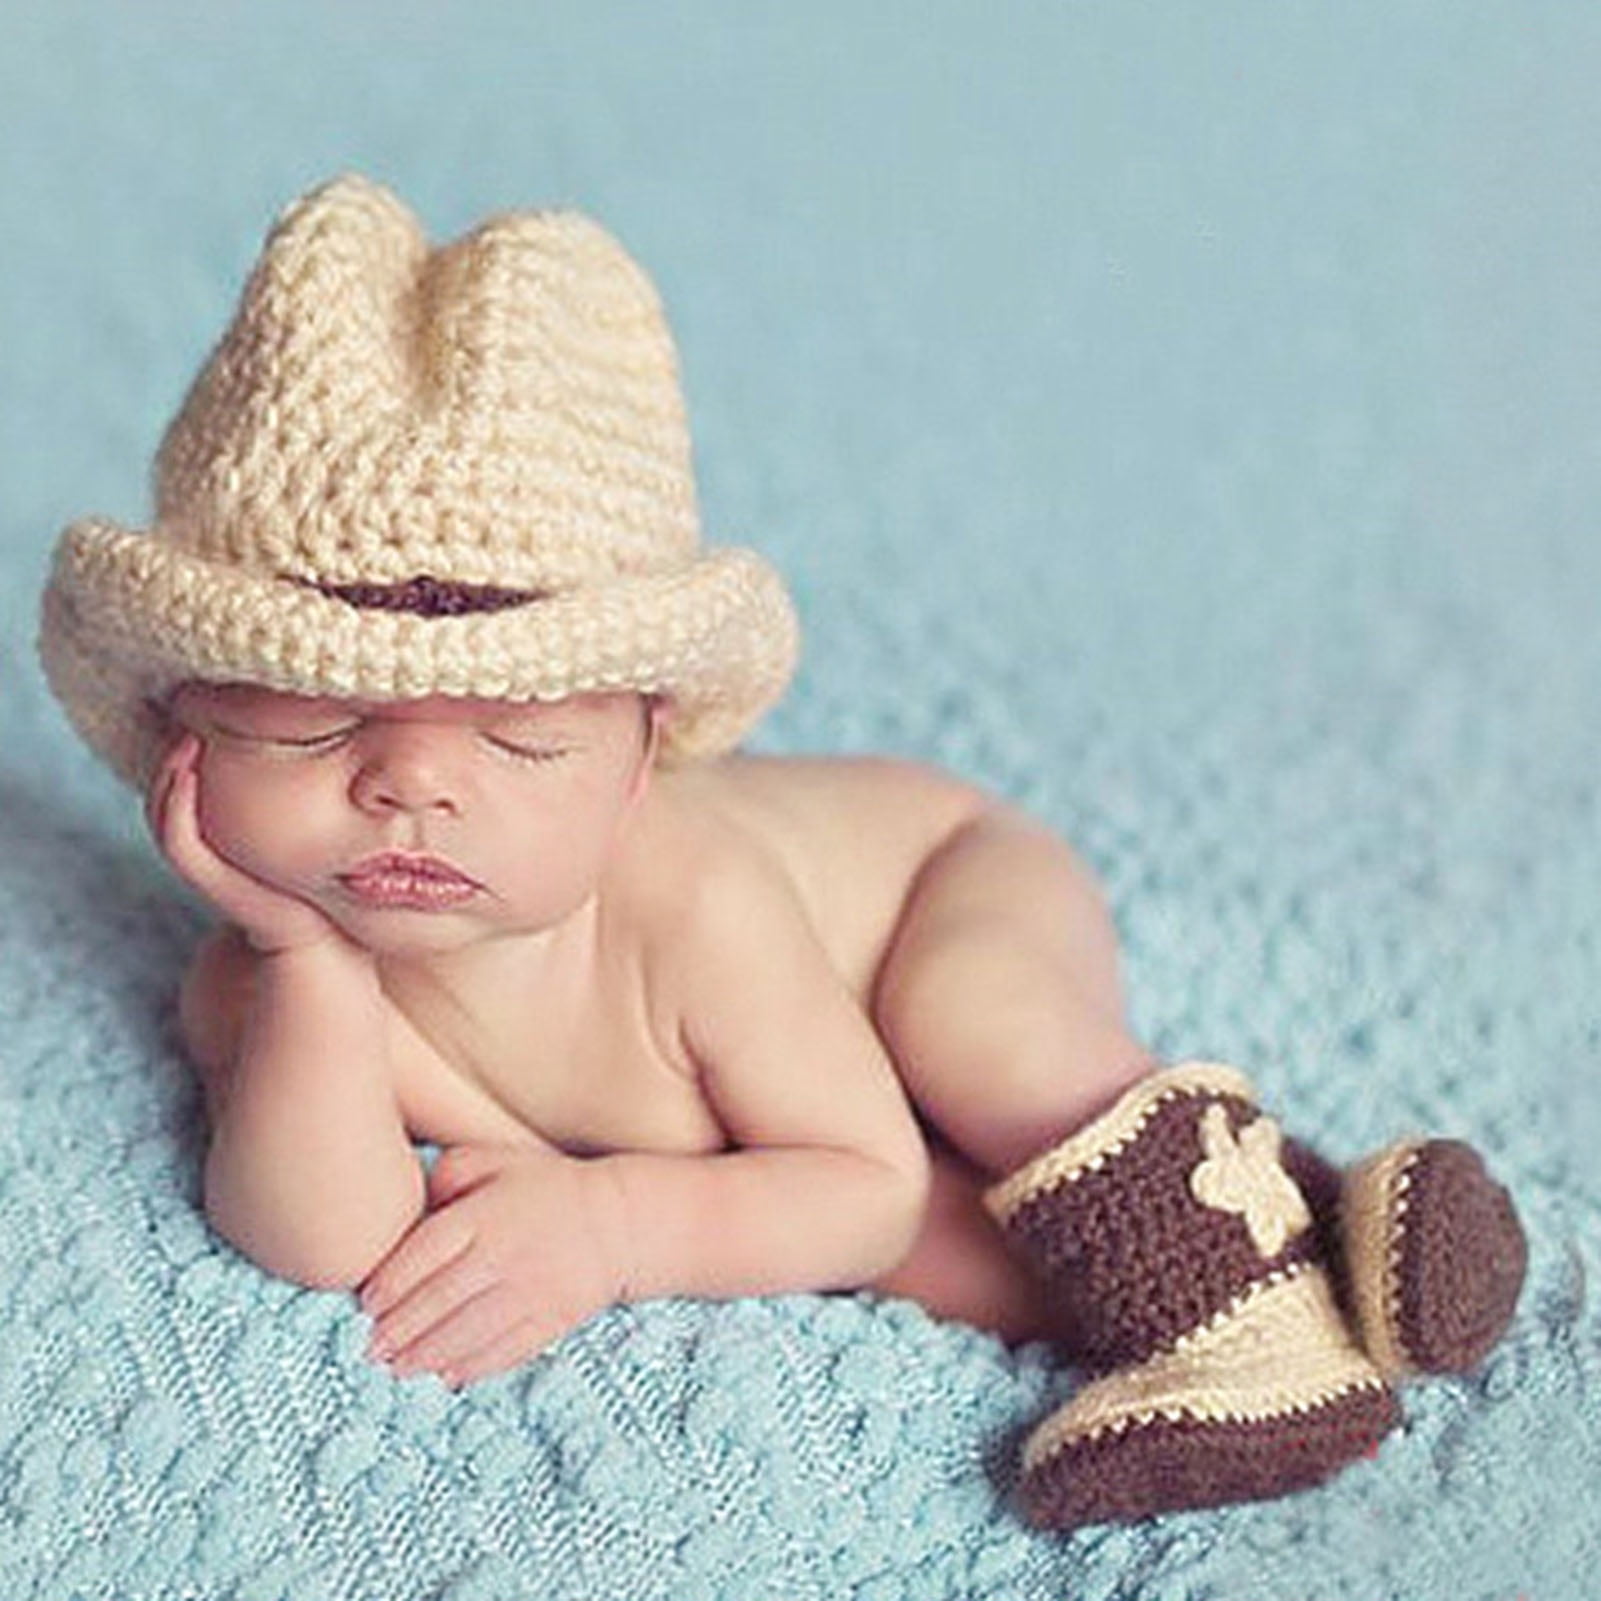 Visland Newborn Baby Photography Props Boy Girl Photo Shoot Outfits Crochet Knitted Clothes Cowboy Hat Shoes Set - Walmart.com